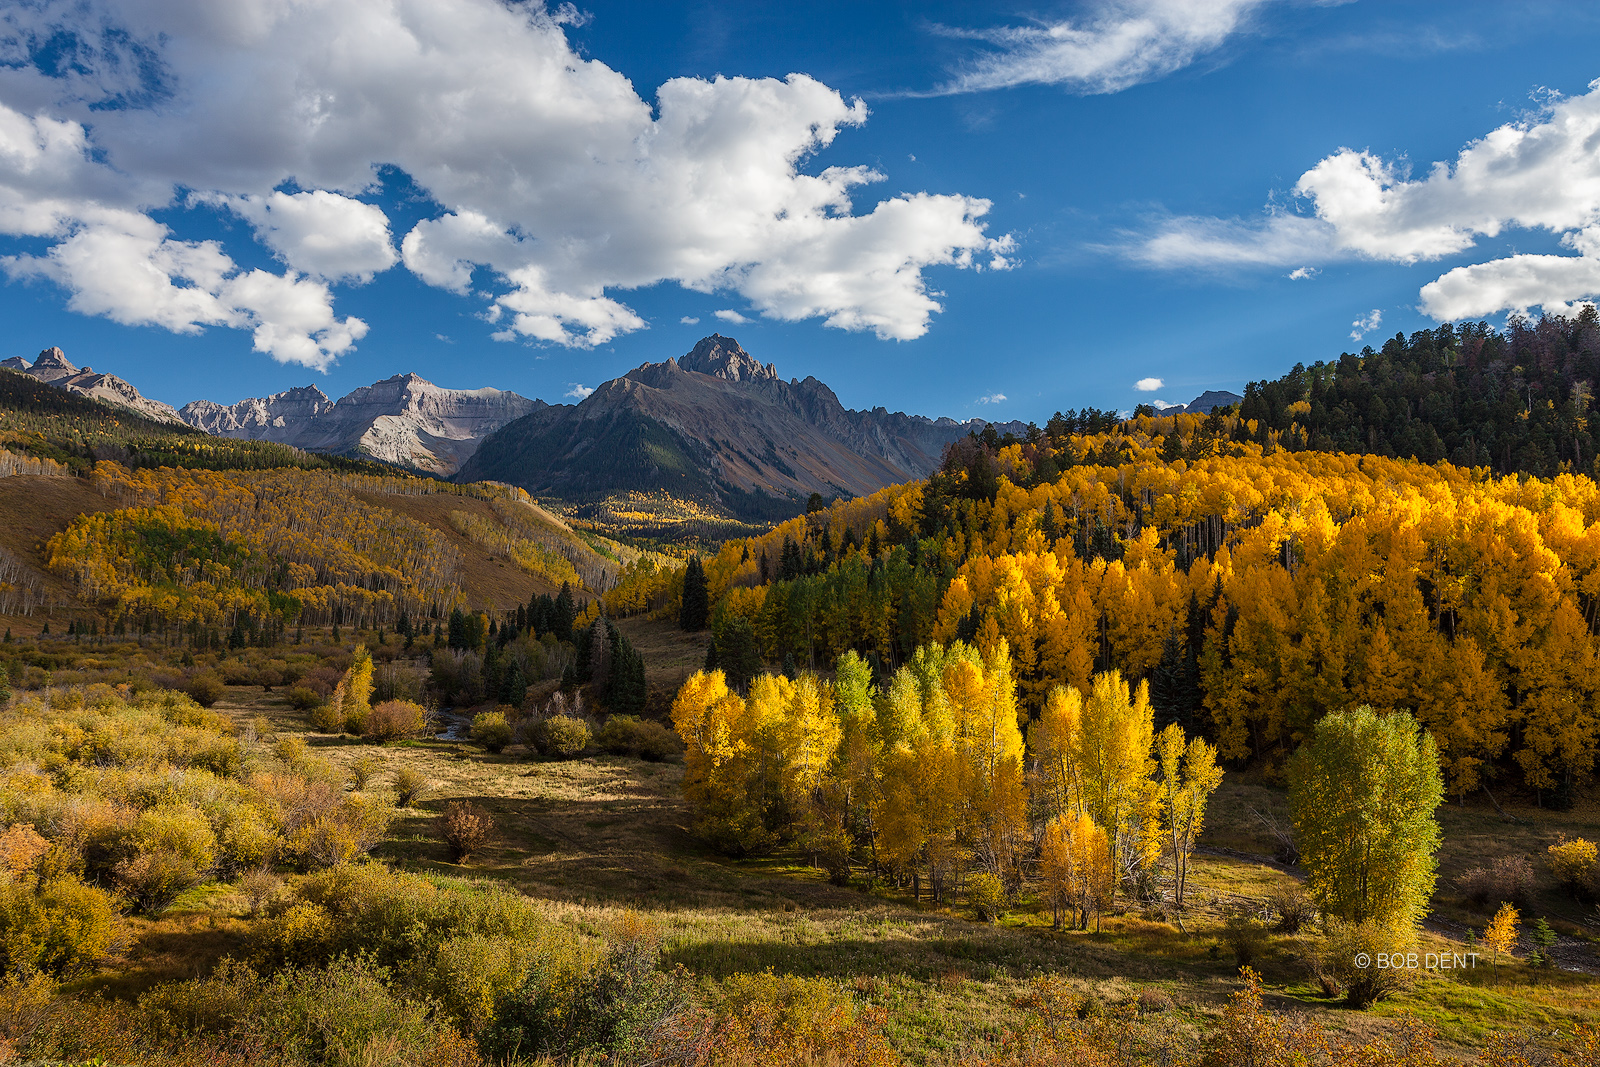 View of Mt. Sneffels on a classic autumn afternoon.